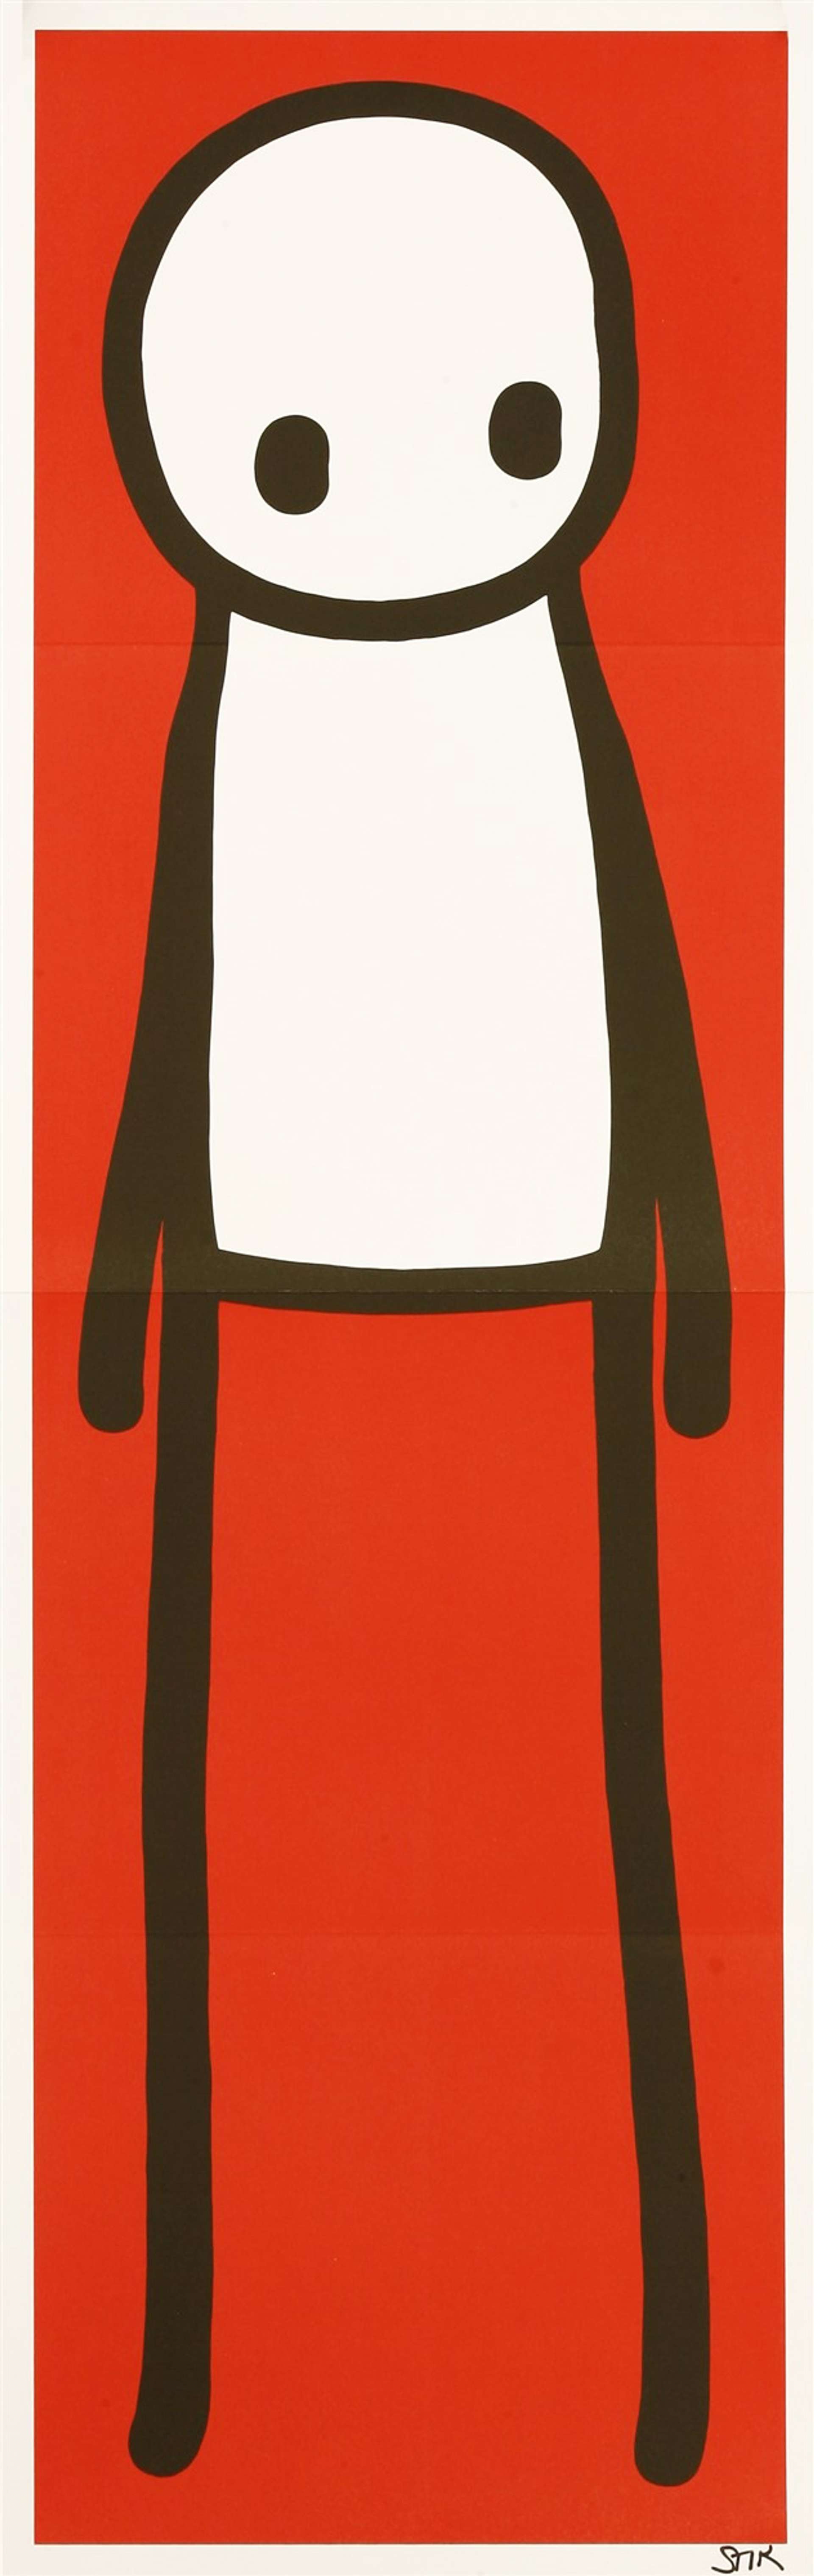 Standing Figure (red) by Stik